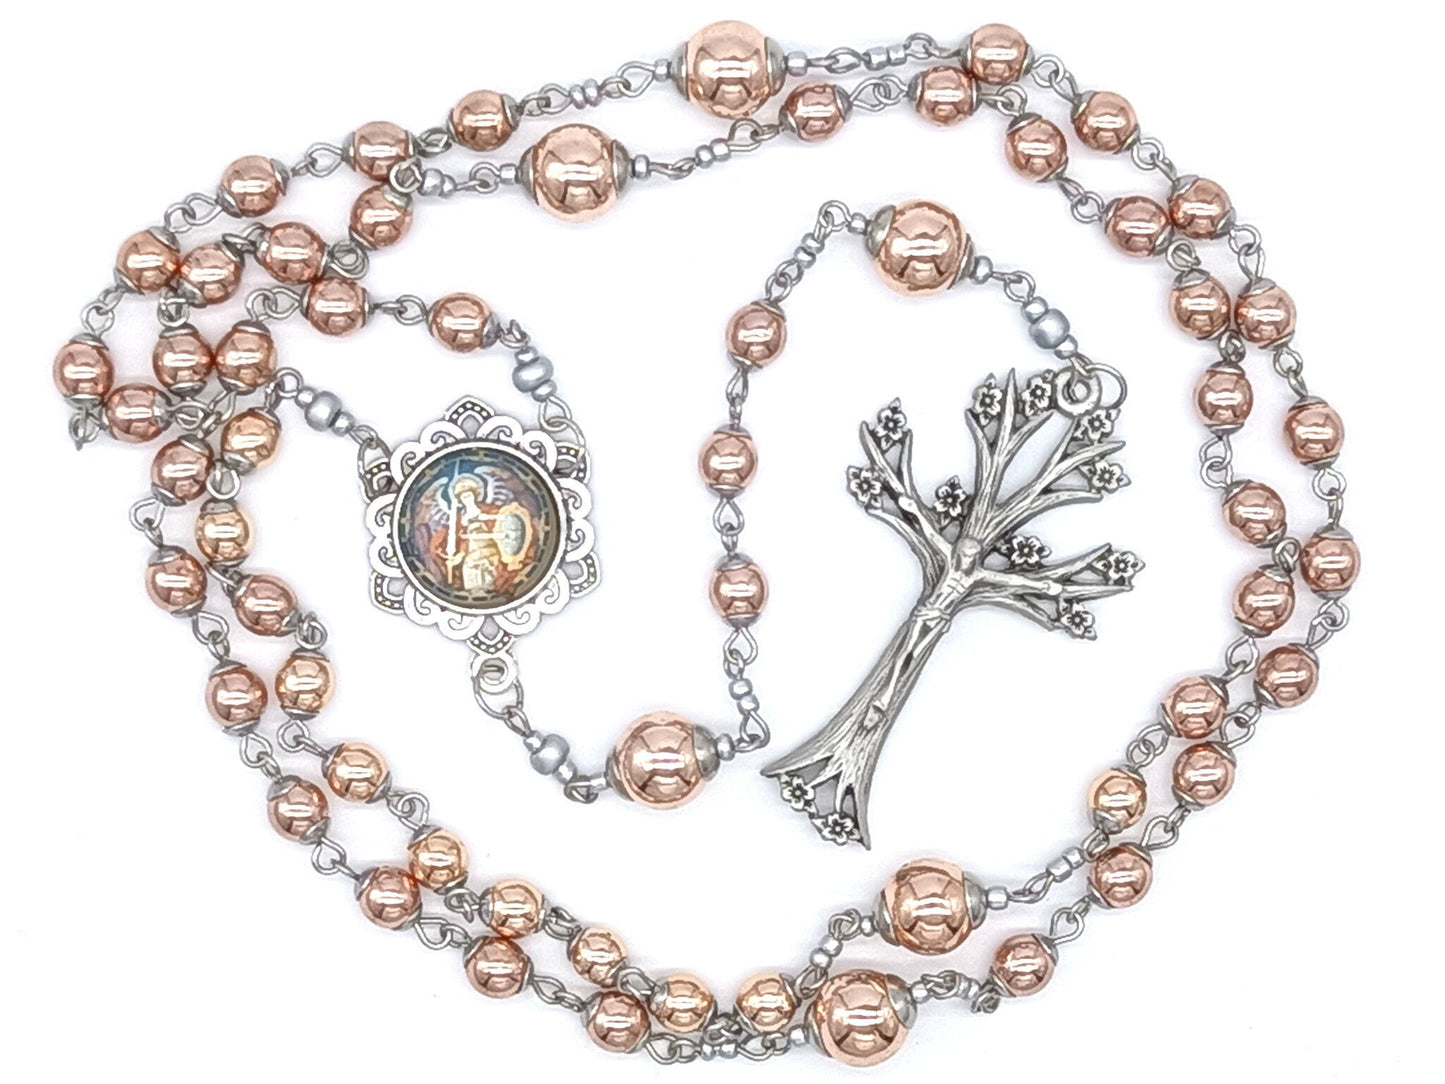 Saint Michael unique rosary beads with rose gold hematite beads and pewter dogwood crucifix, silver Saint Michael picture centre medal and silver bead caps.